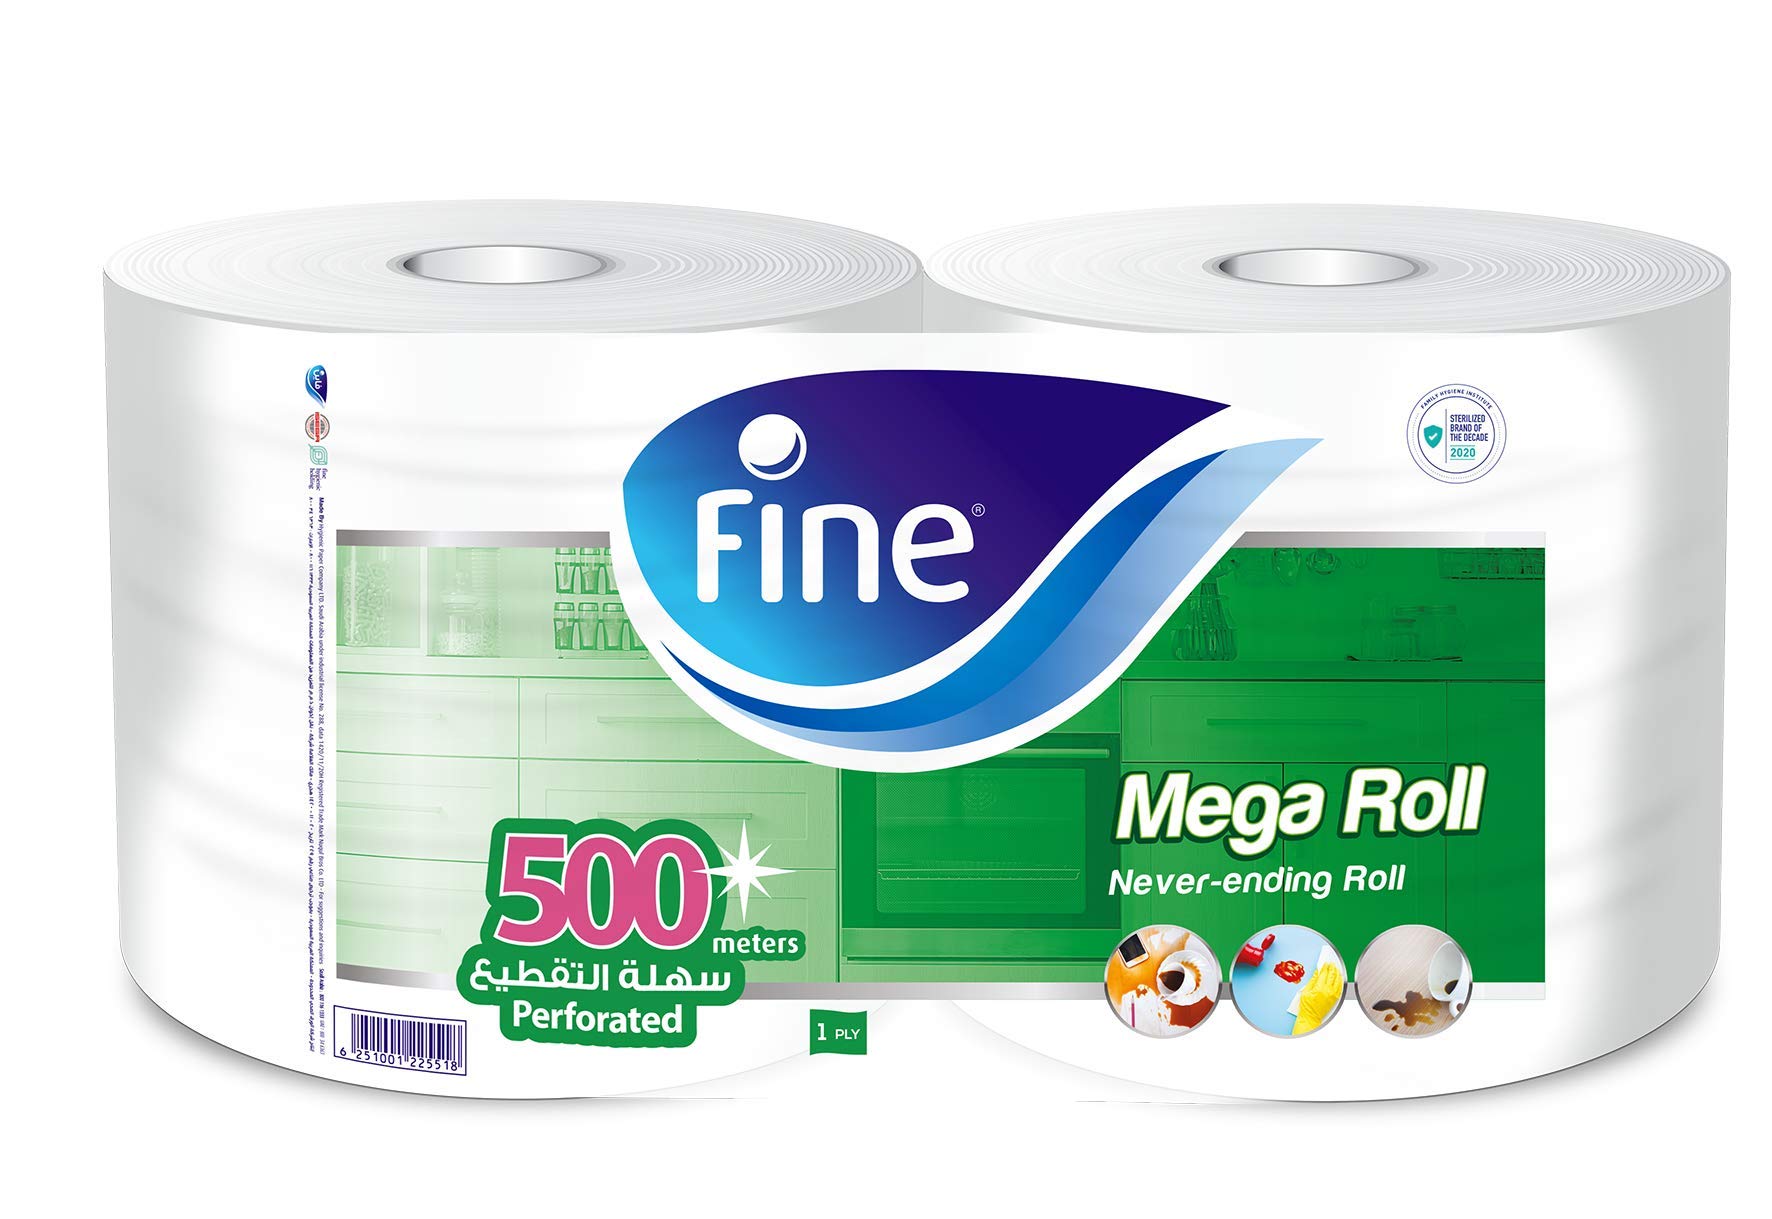 Fine Sterilized Kitchen Towel Mega Roll, 250 meters Long - Pack of 2 Big kitchen tissue roll, Highly absorbent and sterilized paper towel